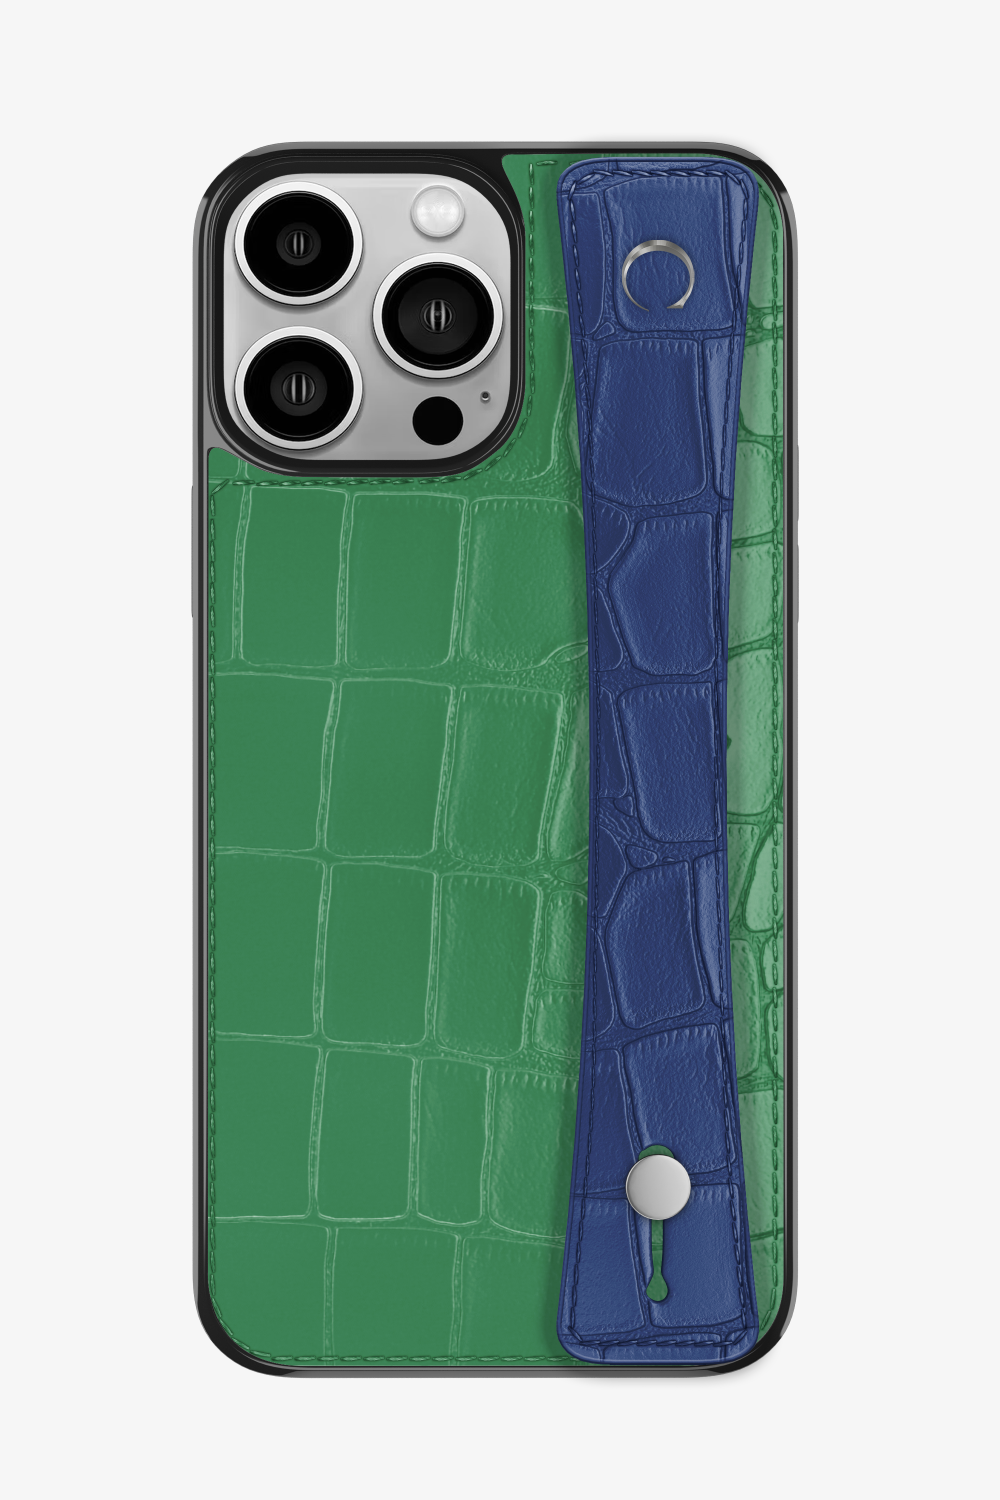 Alligator Sports Strap Case for iPhone 14 Pro Max - Green Emerald / Navy Blue - zollofrance